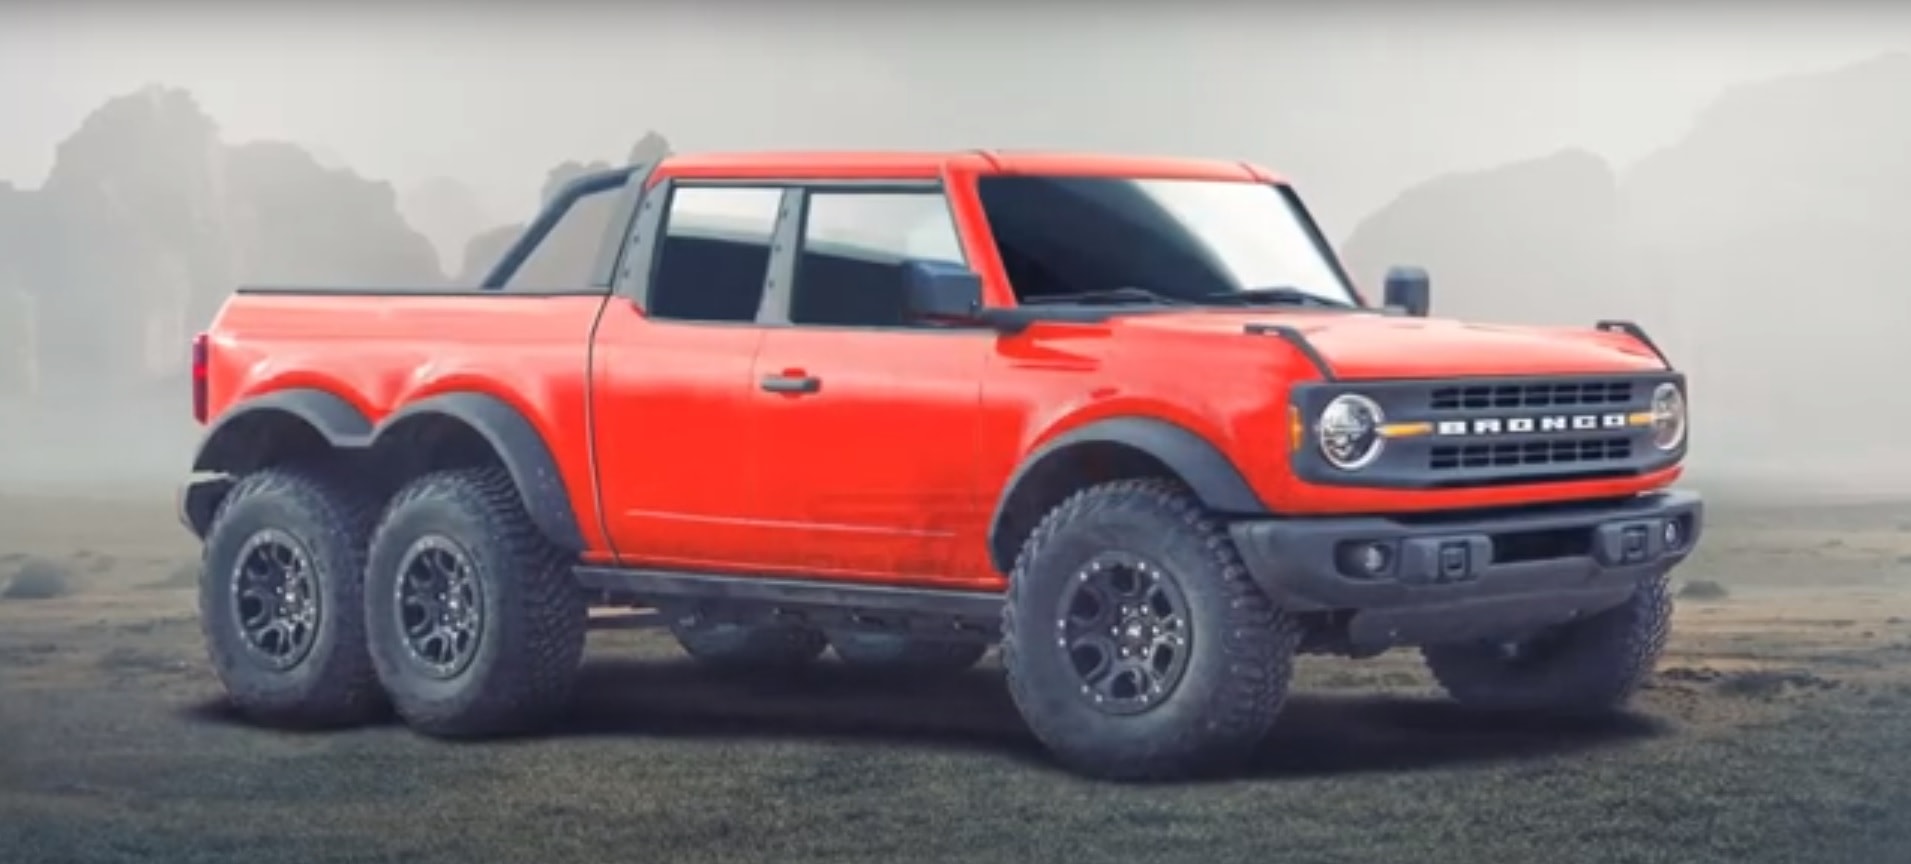 2021 Ford Bronco Morphs Into A 6x6 Monster Under Your Very Eyes